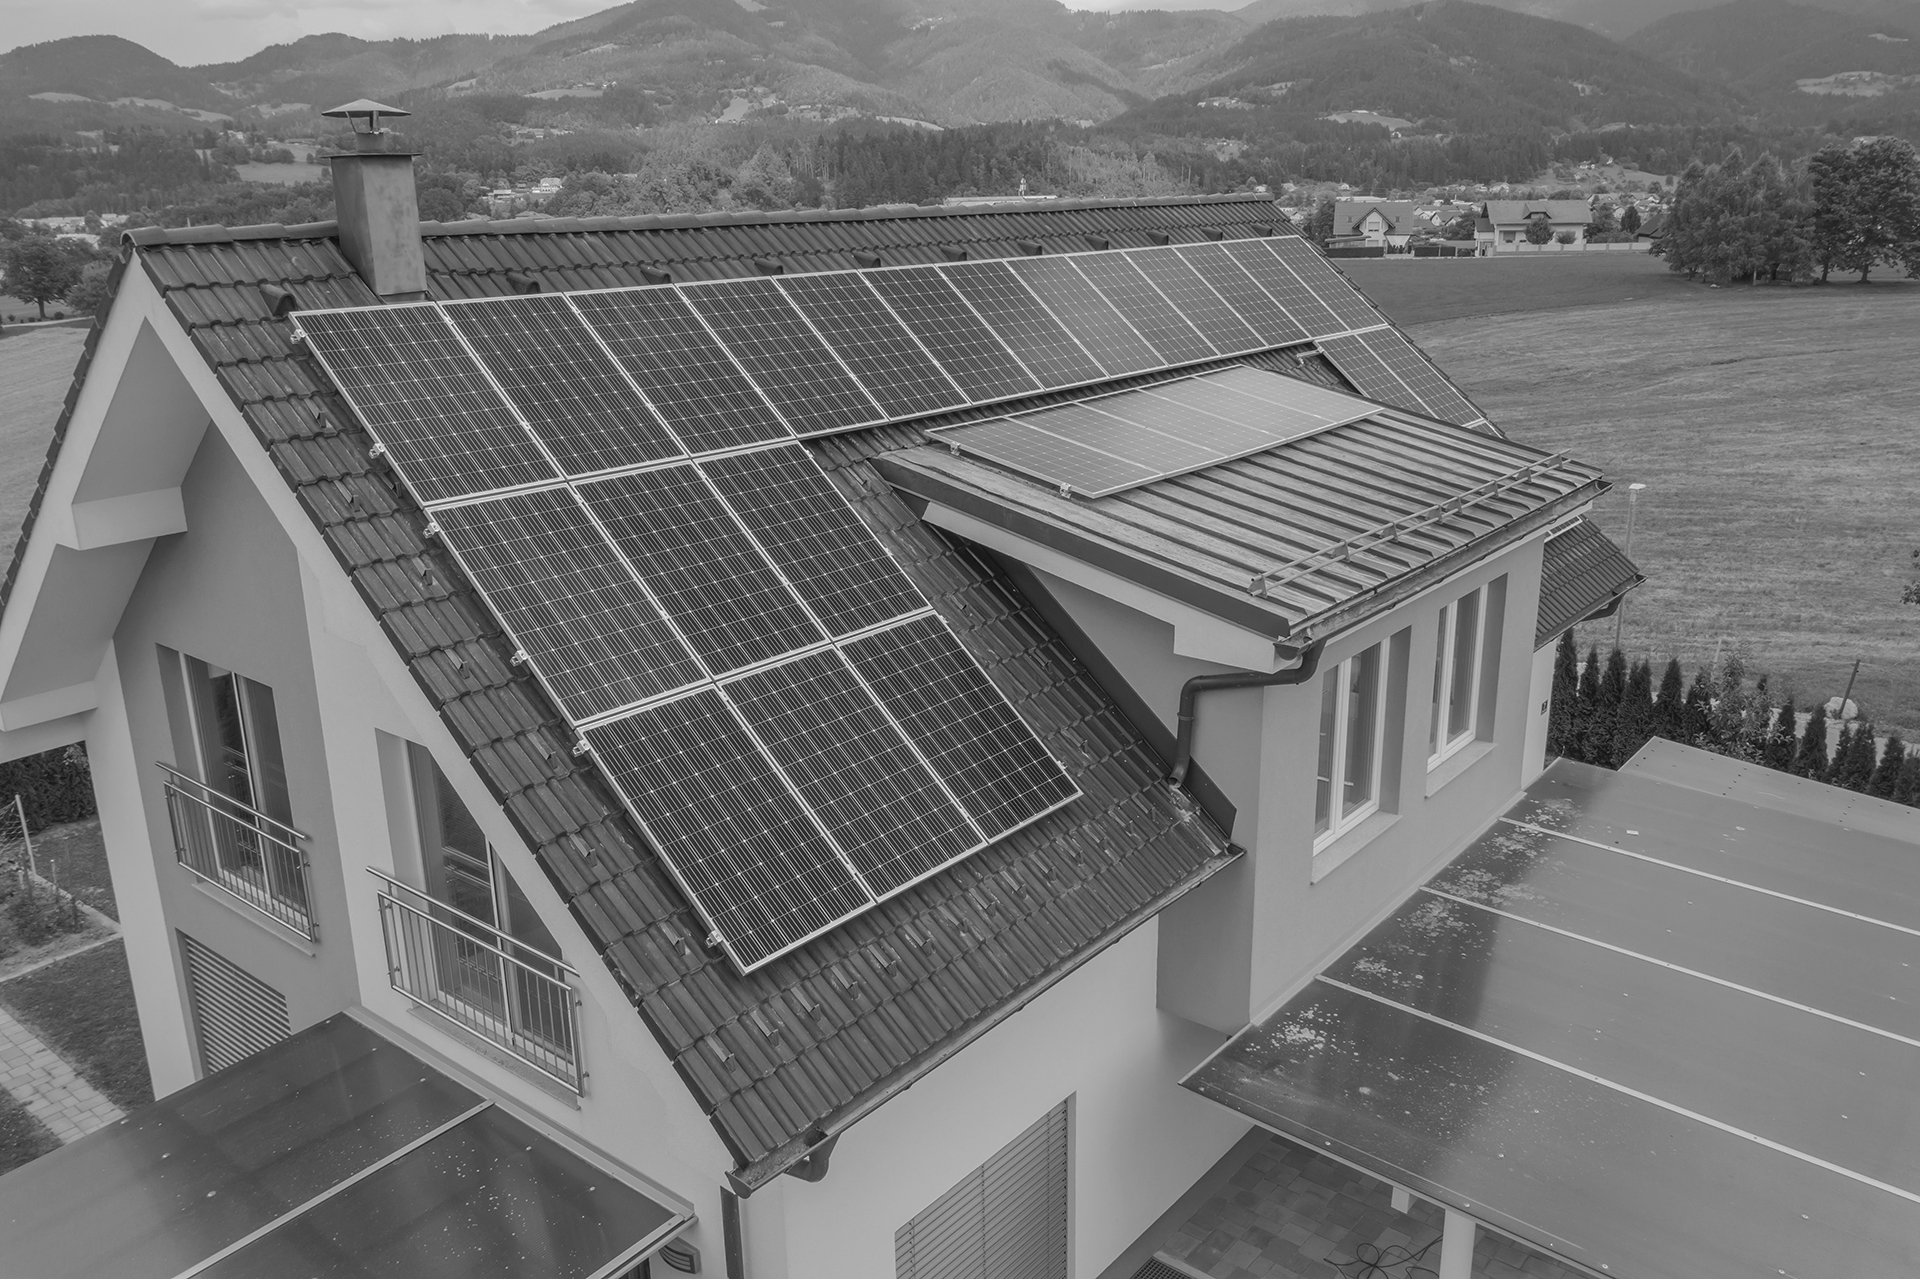 A high angle shot of a private house situated in a valley with solar panels on the roof